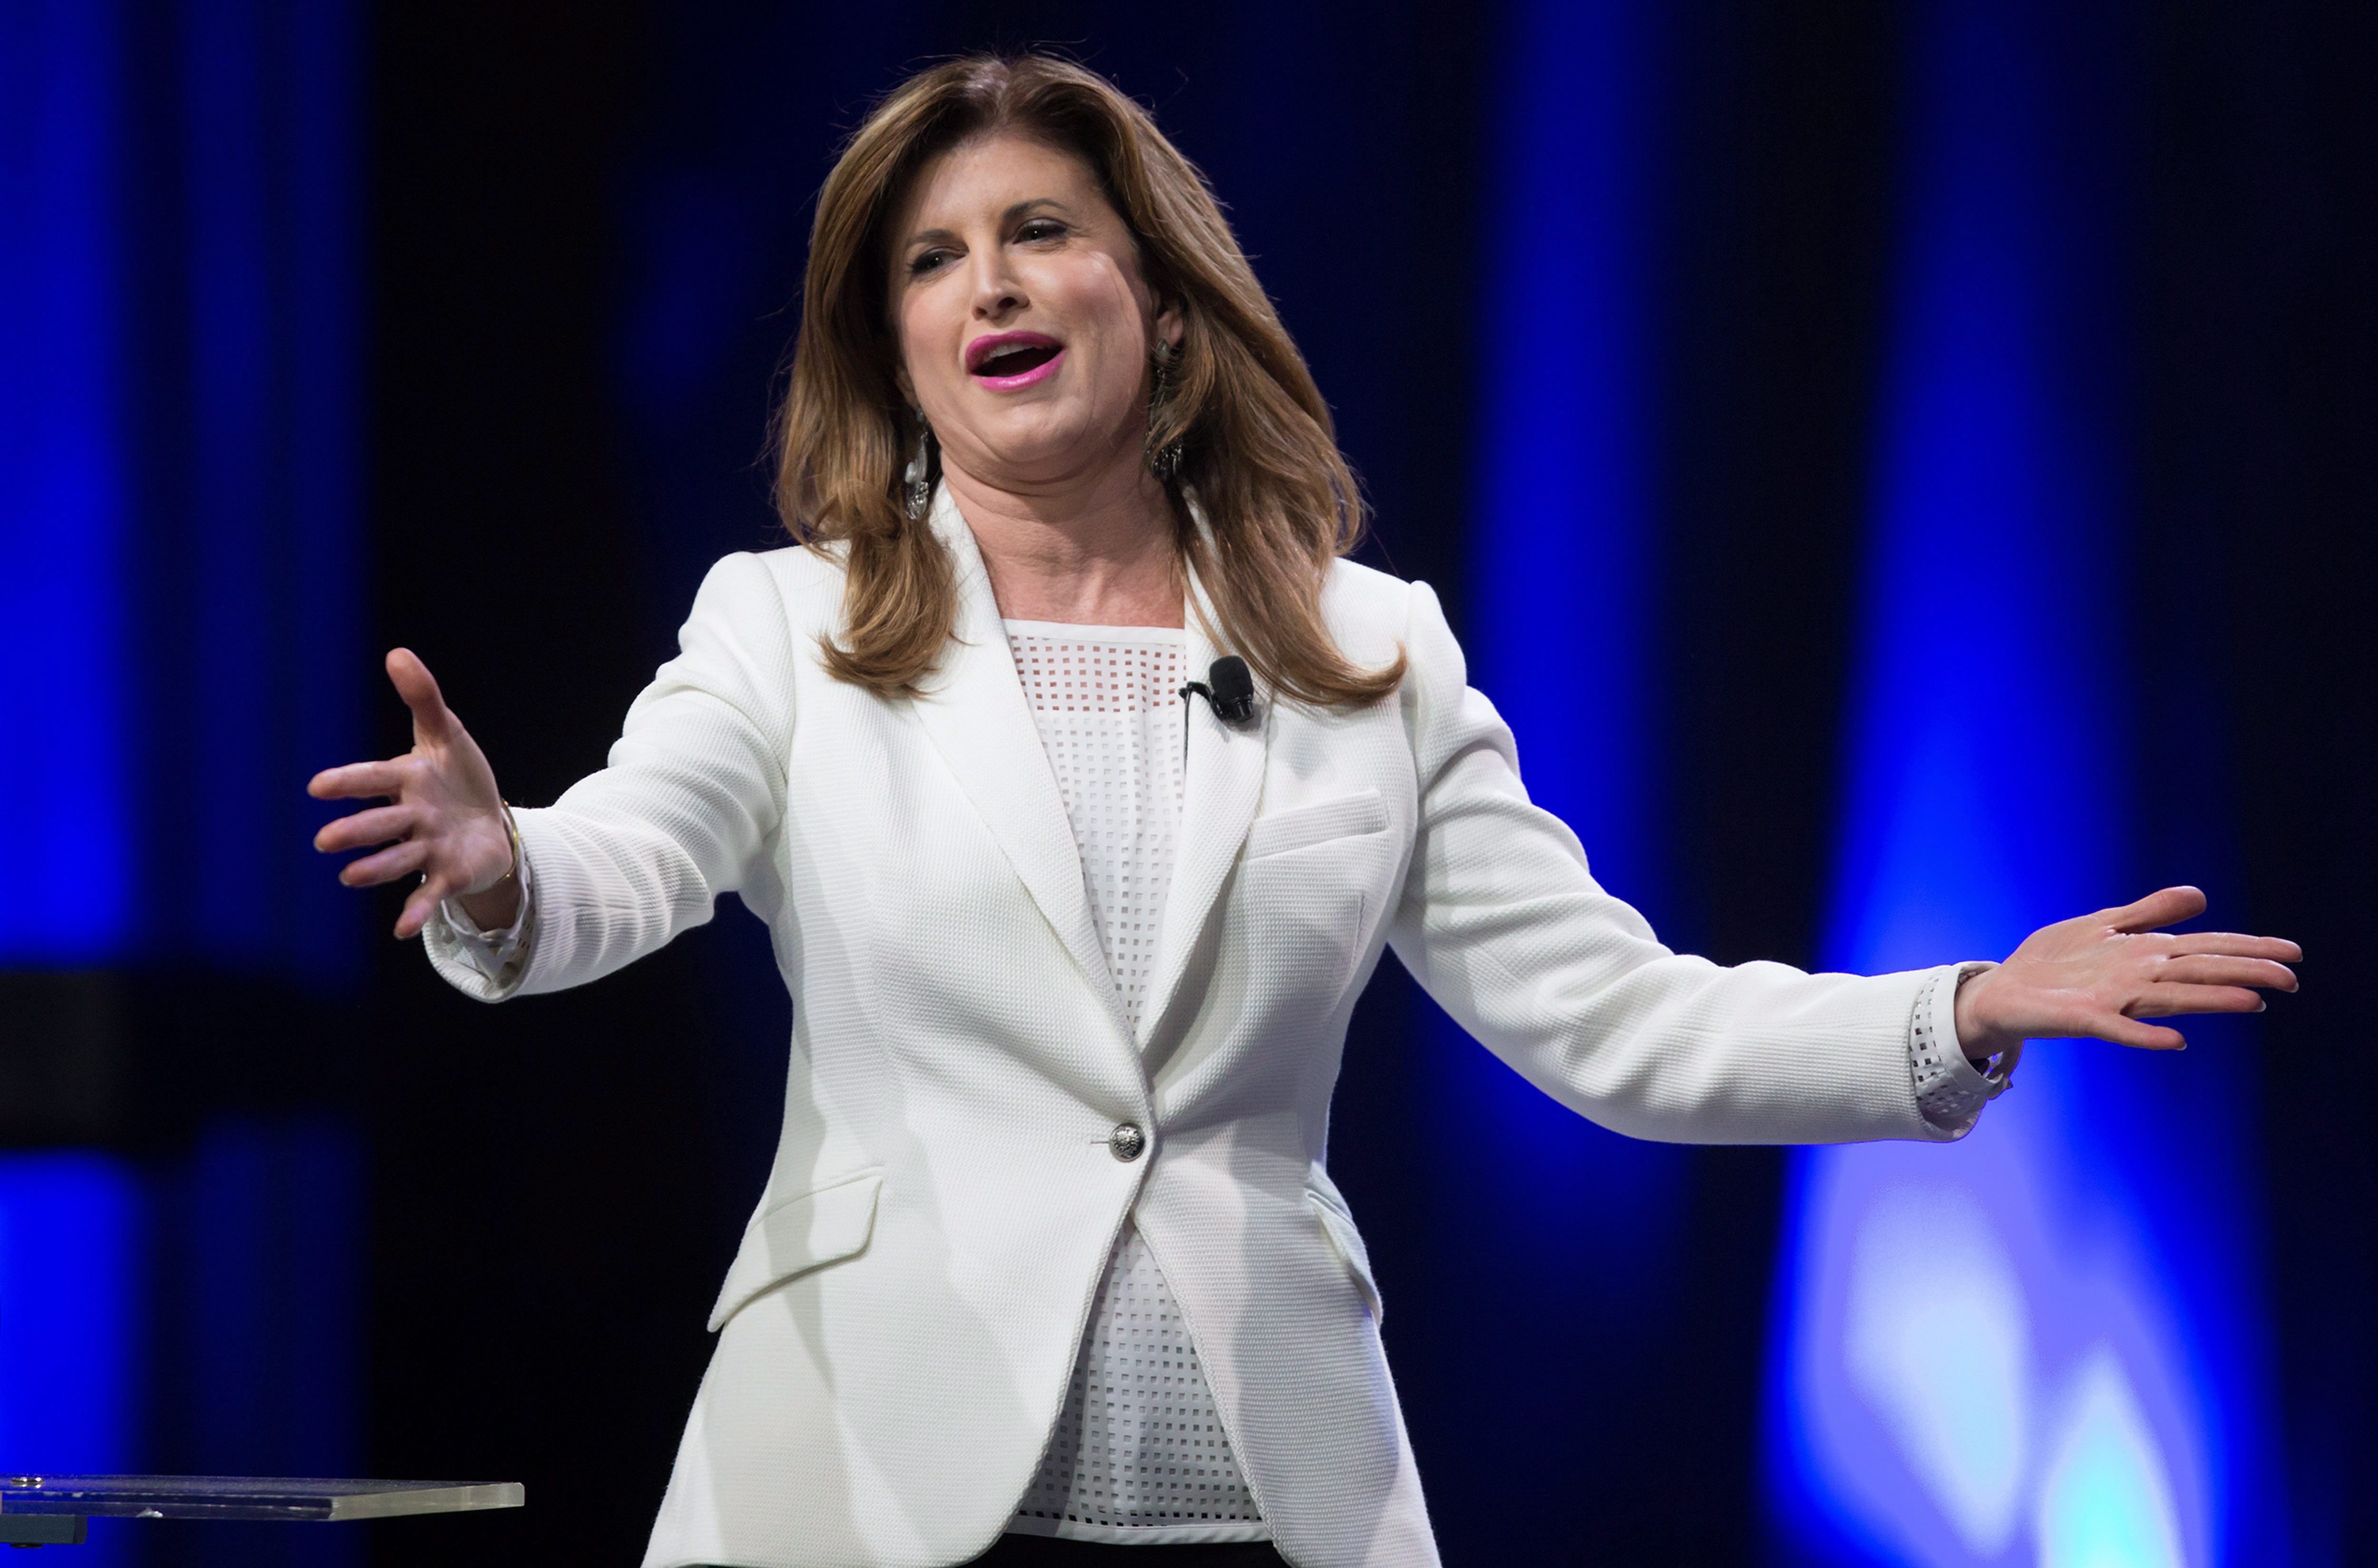 Interim Conservative Party leader Rona Ambrose speaking to delegates during the 2016 Conservative Party Convention in Vancouver, B.C. on Thursday May 26, 2016. THE CANADIAN PRESS/Darryl Dyck